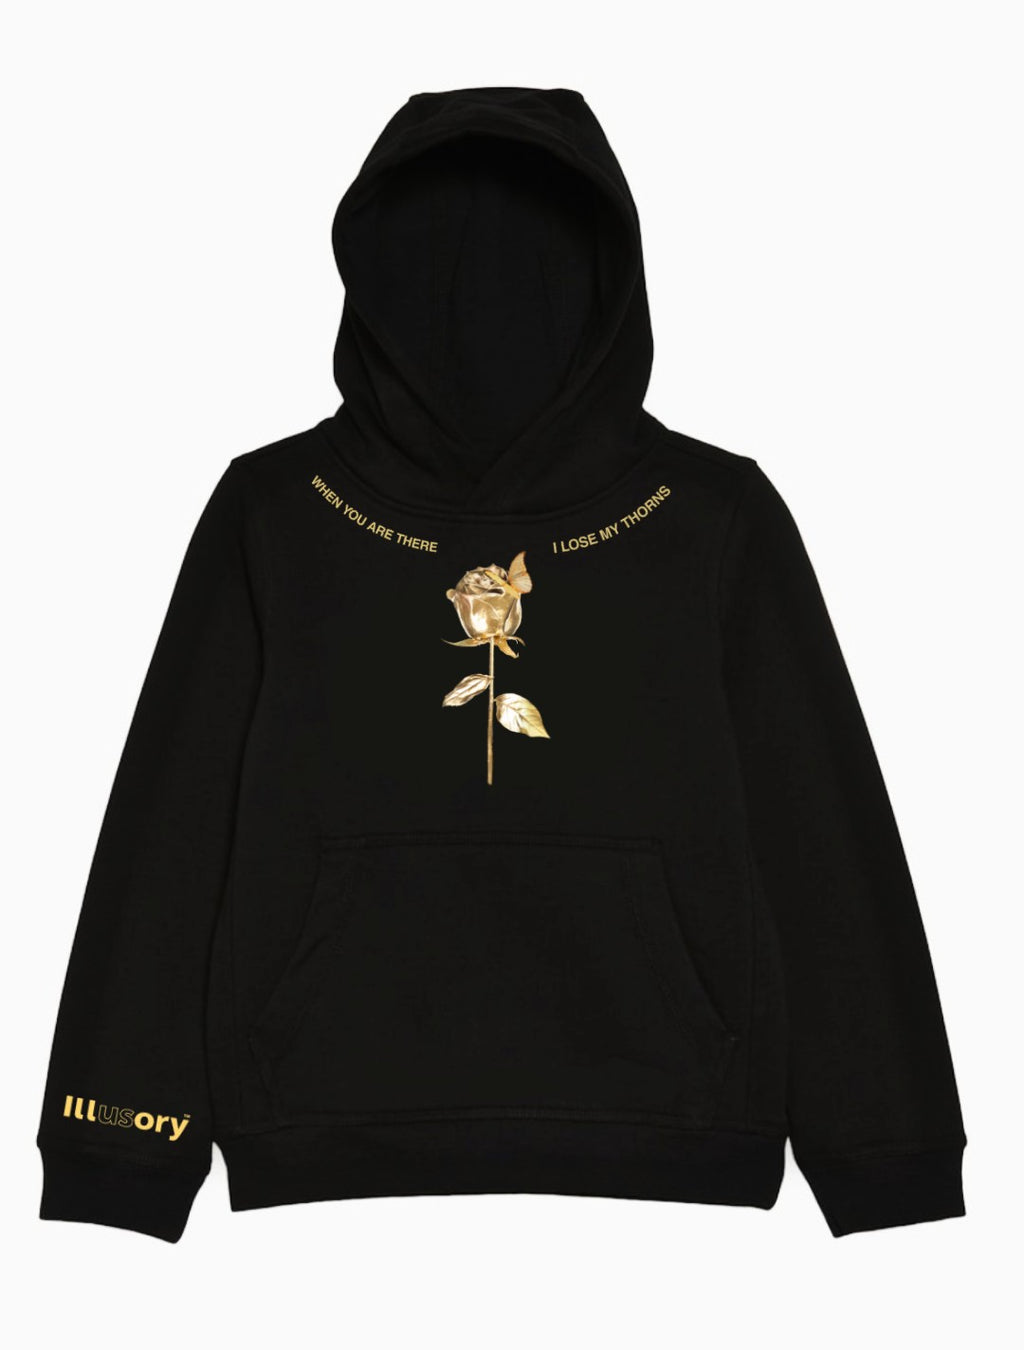 ILLUSORY "PERFECT GOLDEN ROSE" HOODIE